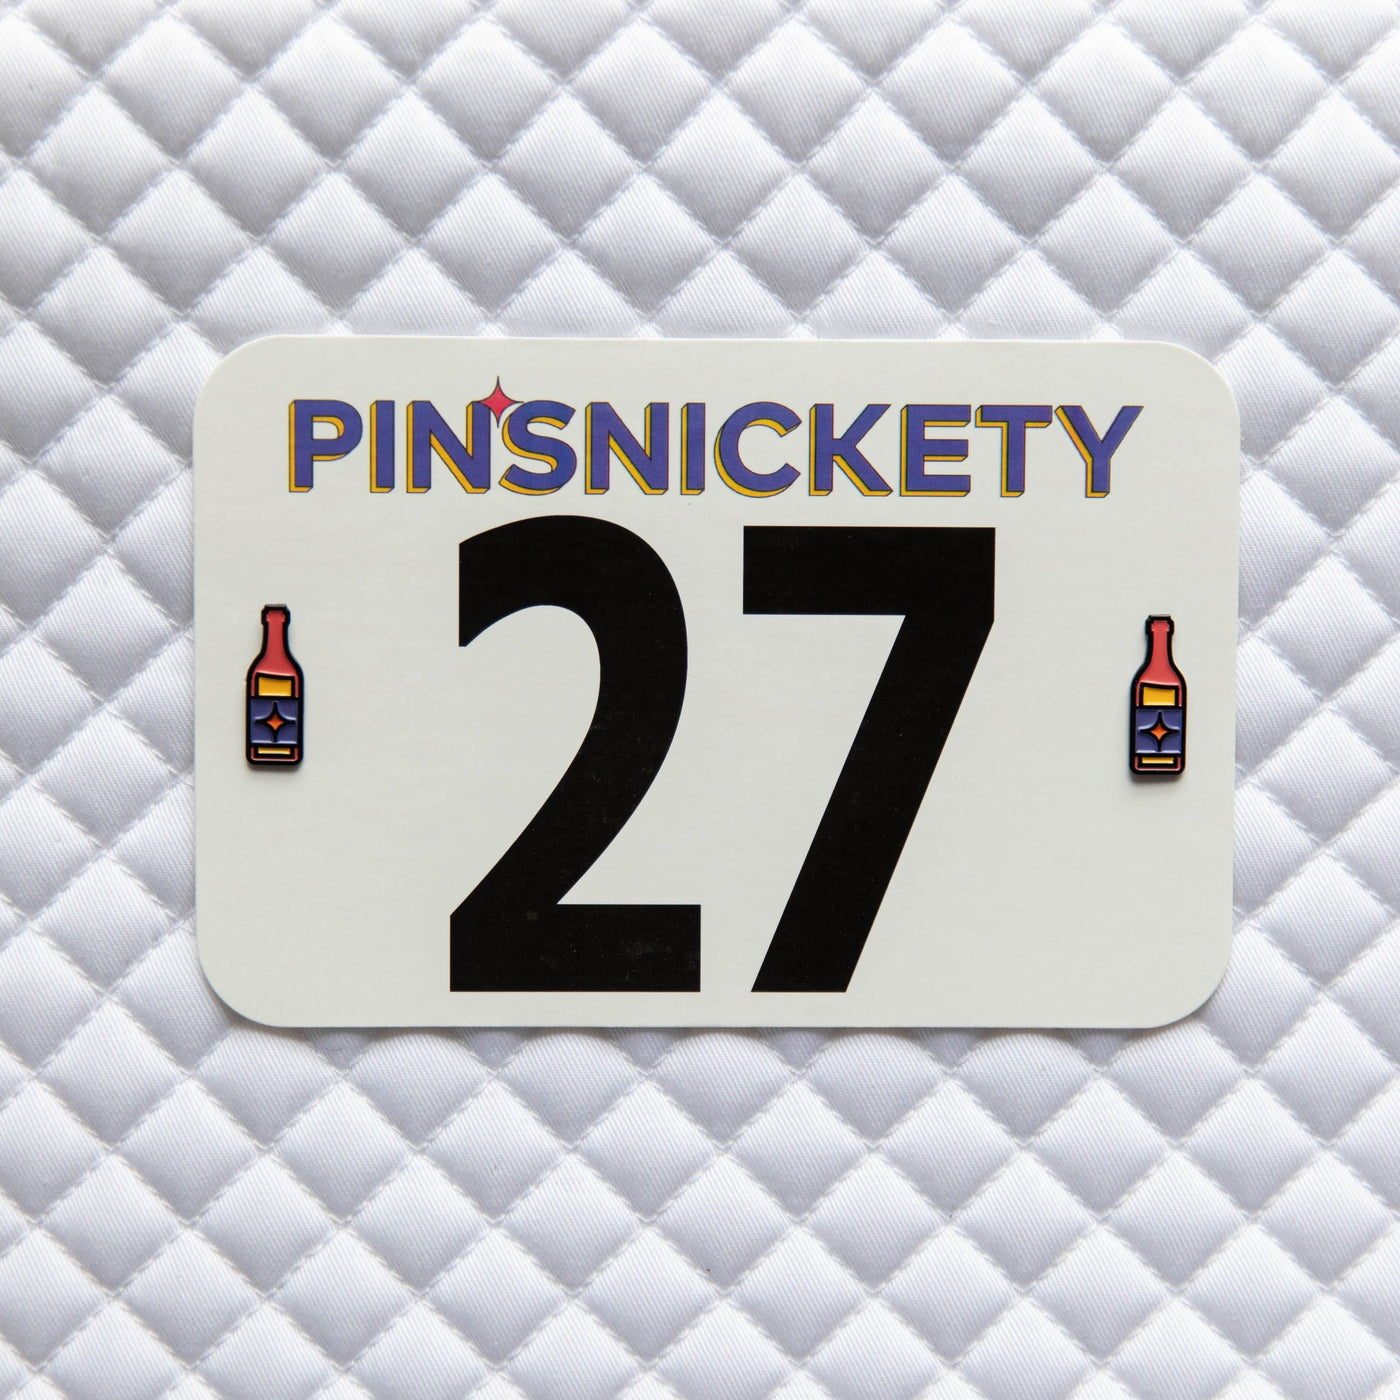 Hot Sauce Pins by Pinsnickety